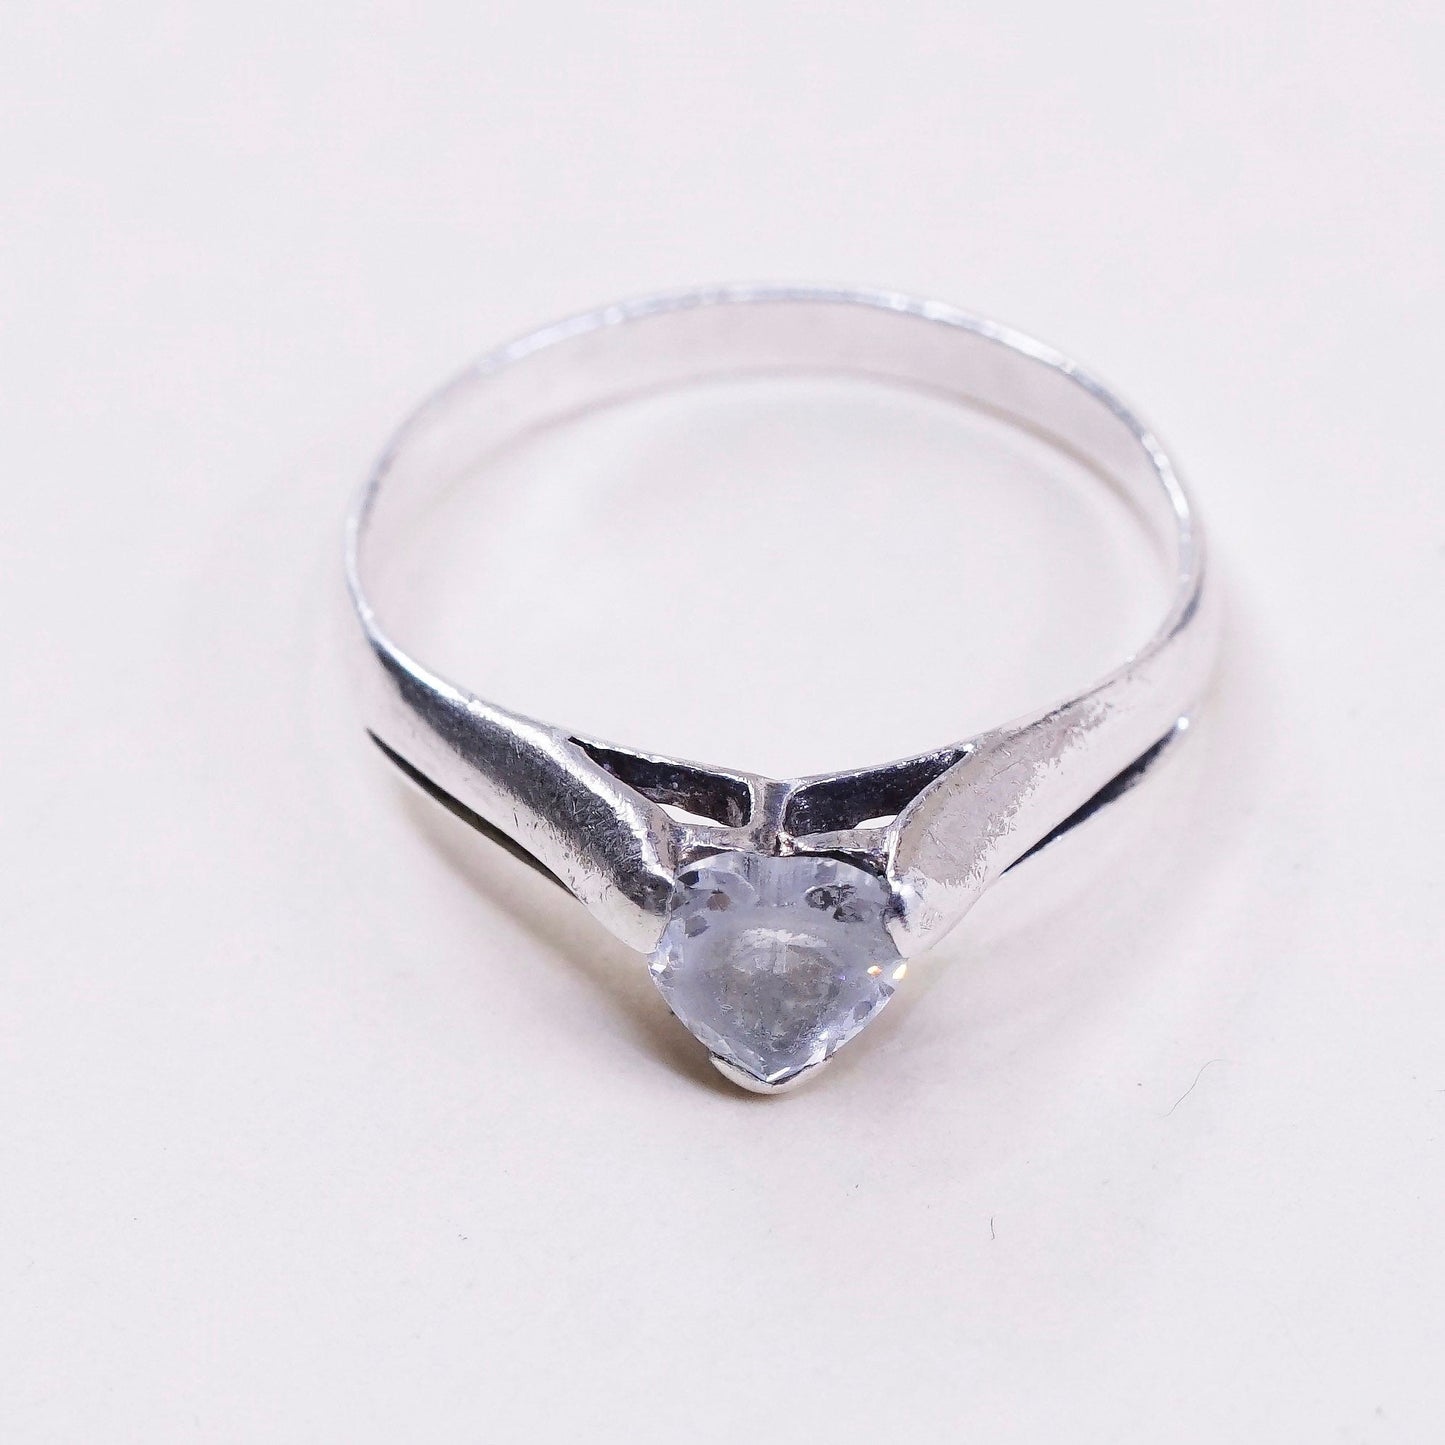 Size 8.75, Vintage handmade sterling 925 silver heart crystal ring